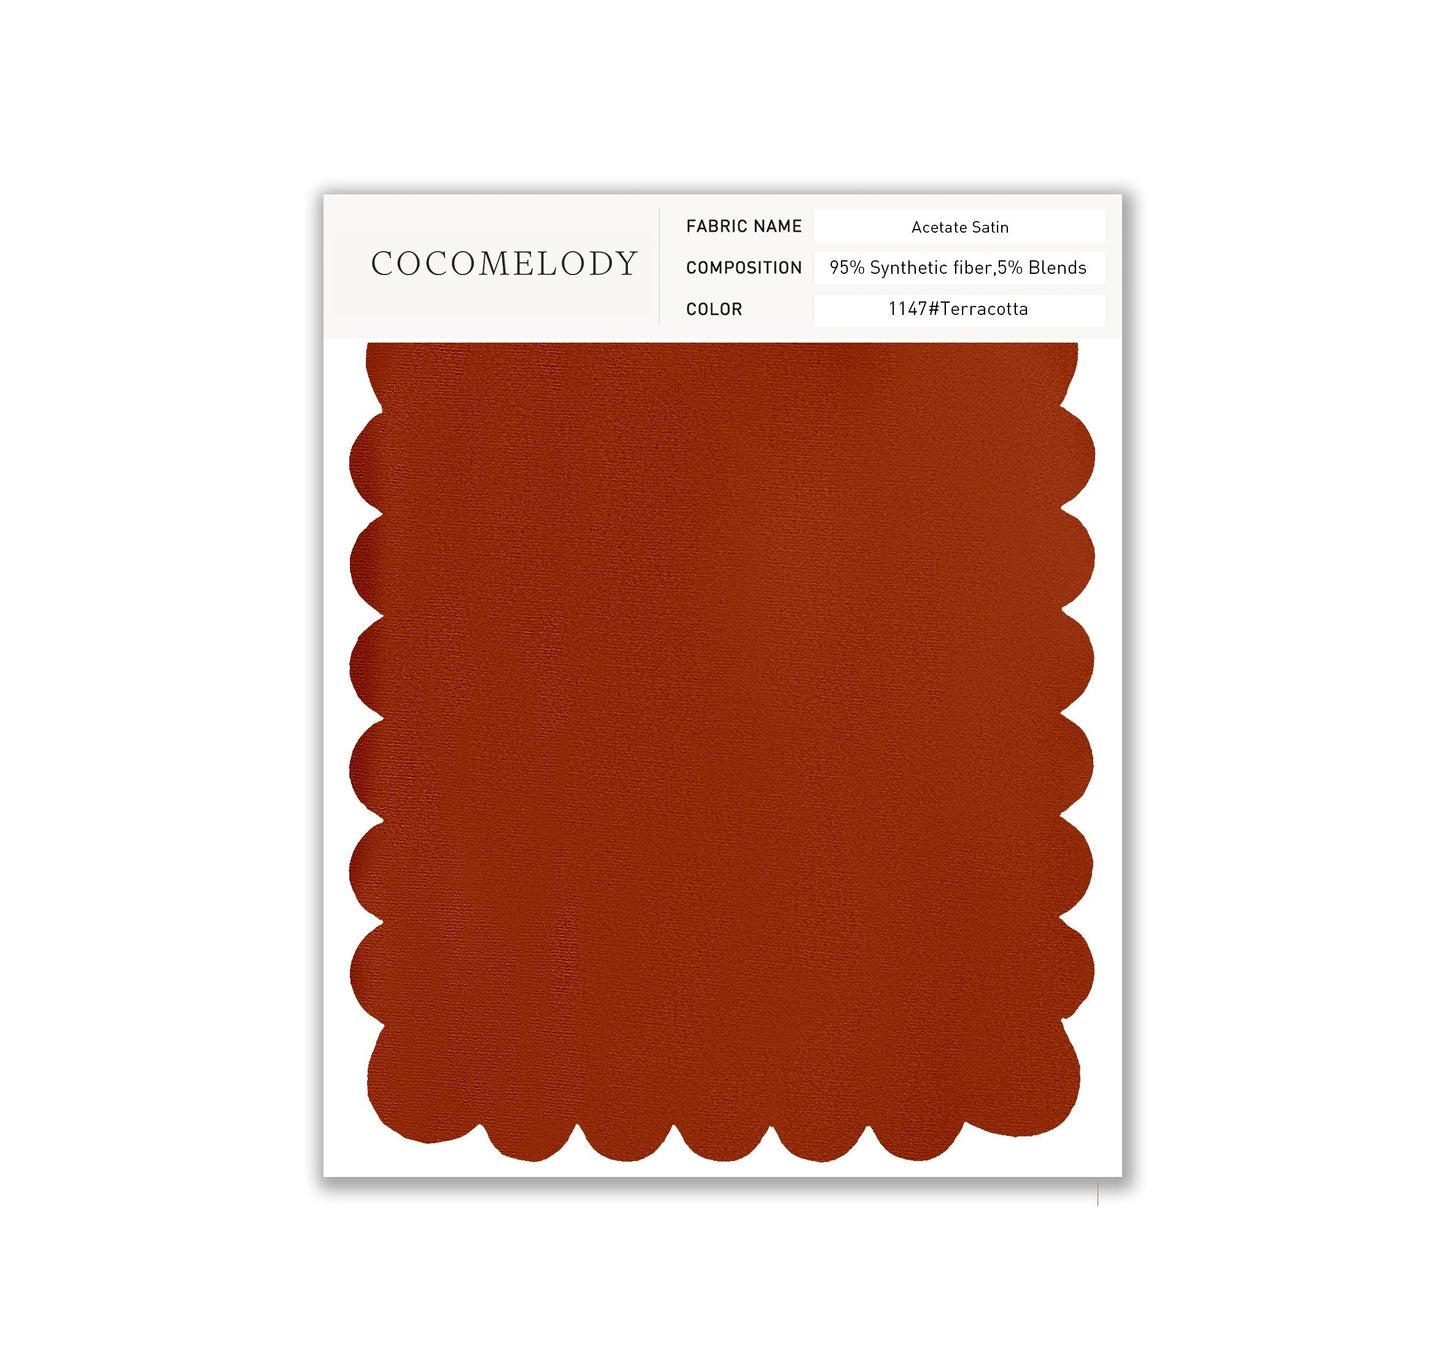 Acetate Satin Fabric Swatch in Single Color SWAS21002